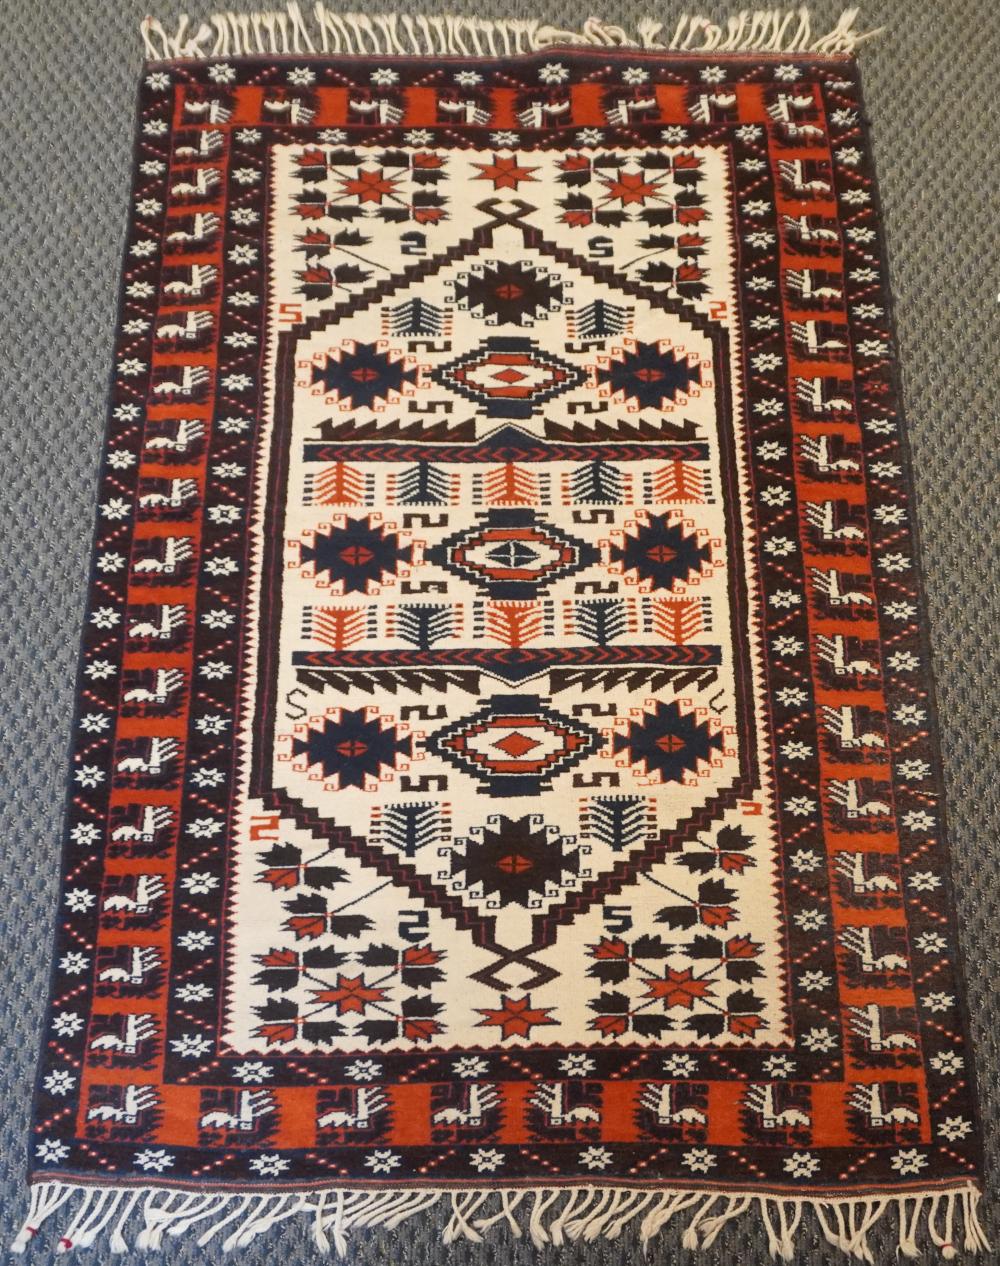 TURKISH RUG 6 FT 1 IN X 3 FT 8 2e6d0f